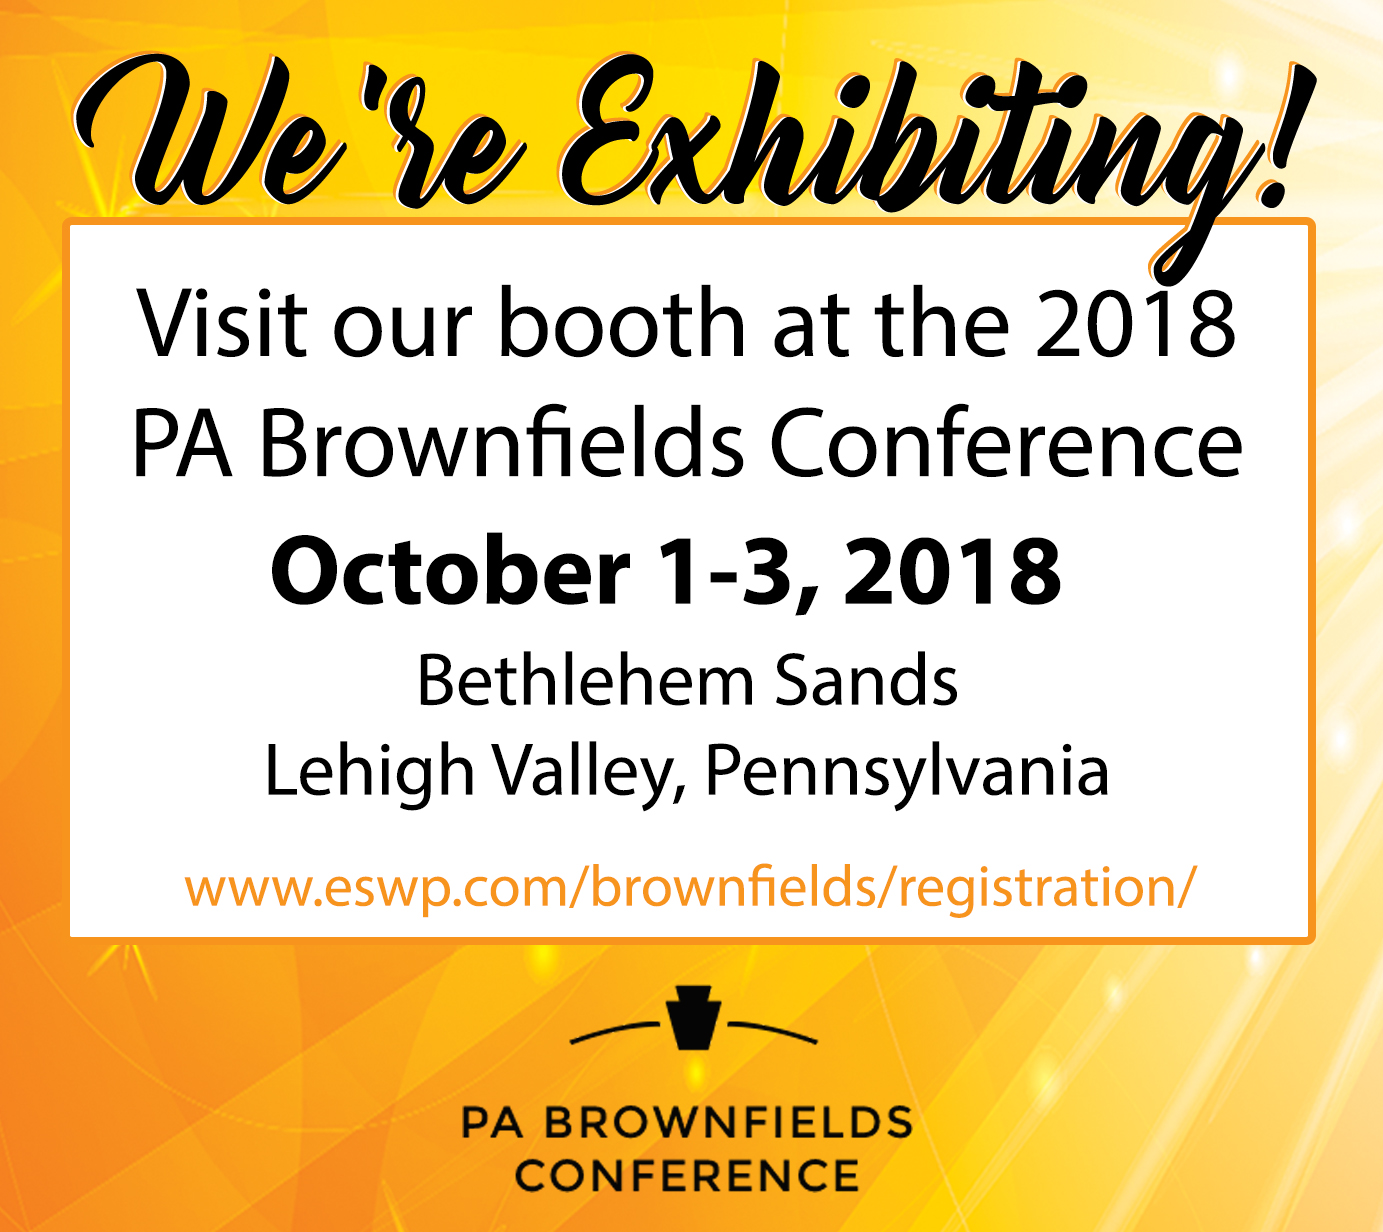 PA Brownfields Conference